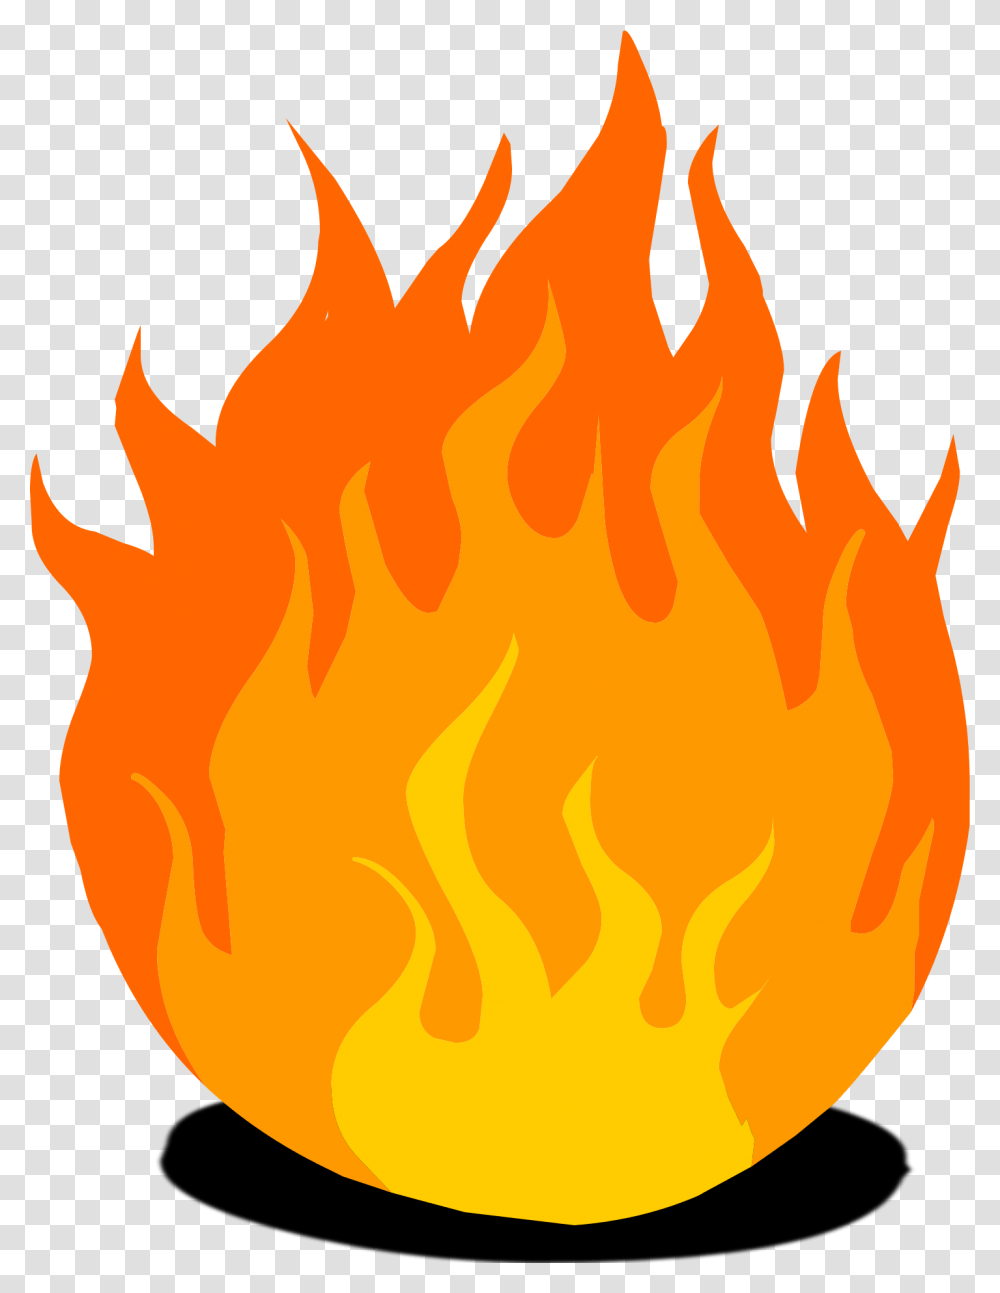 Town Of Salem Role Icons Download Town Of Salem Arsonist Icon, Fire, Flame, Bonfire, Painting Transparent Png